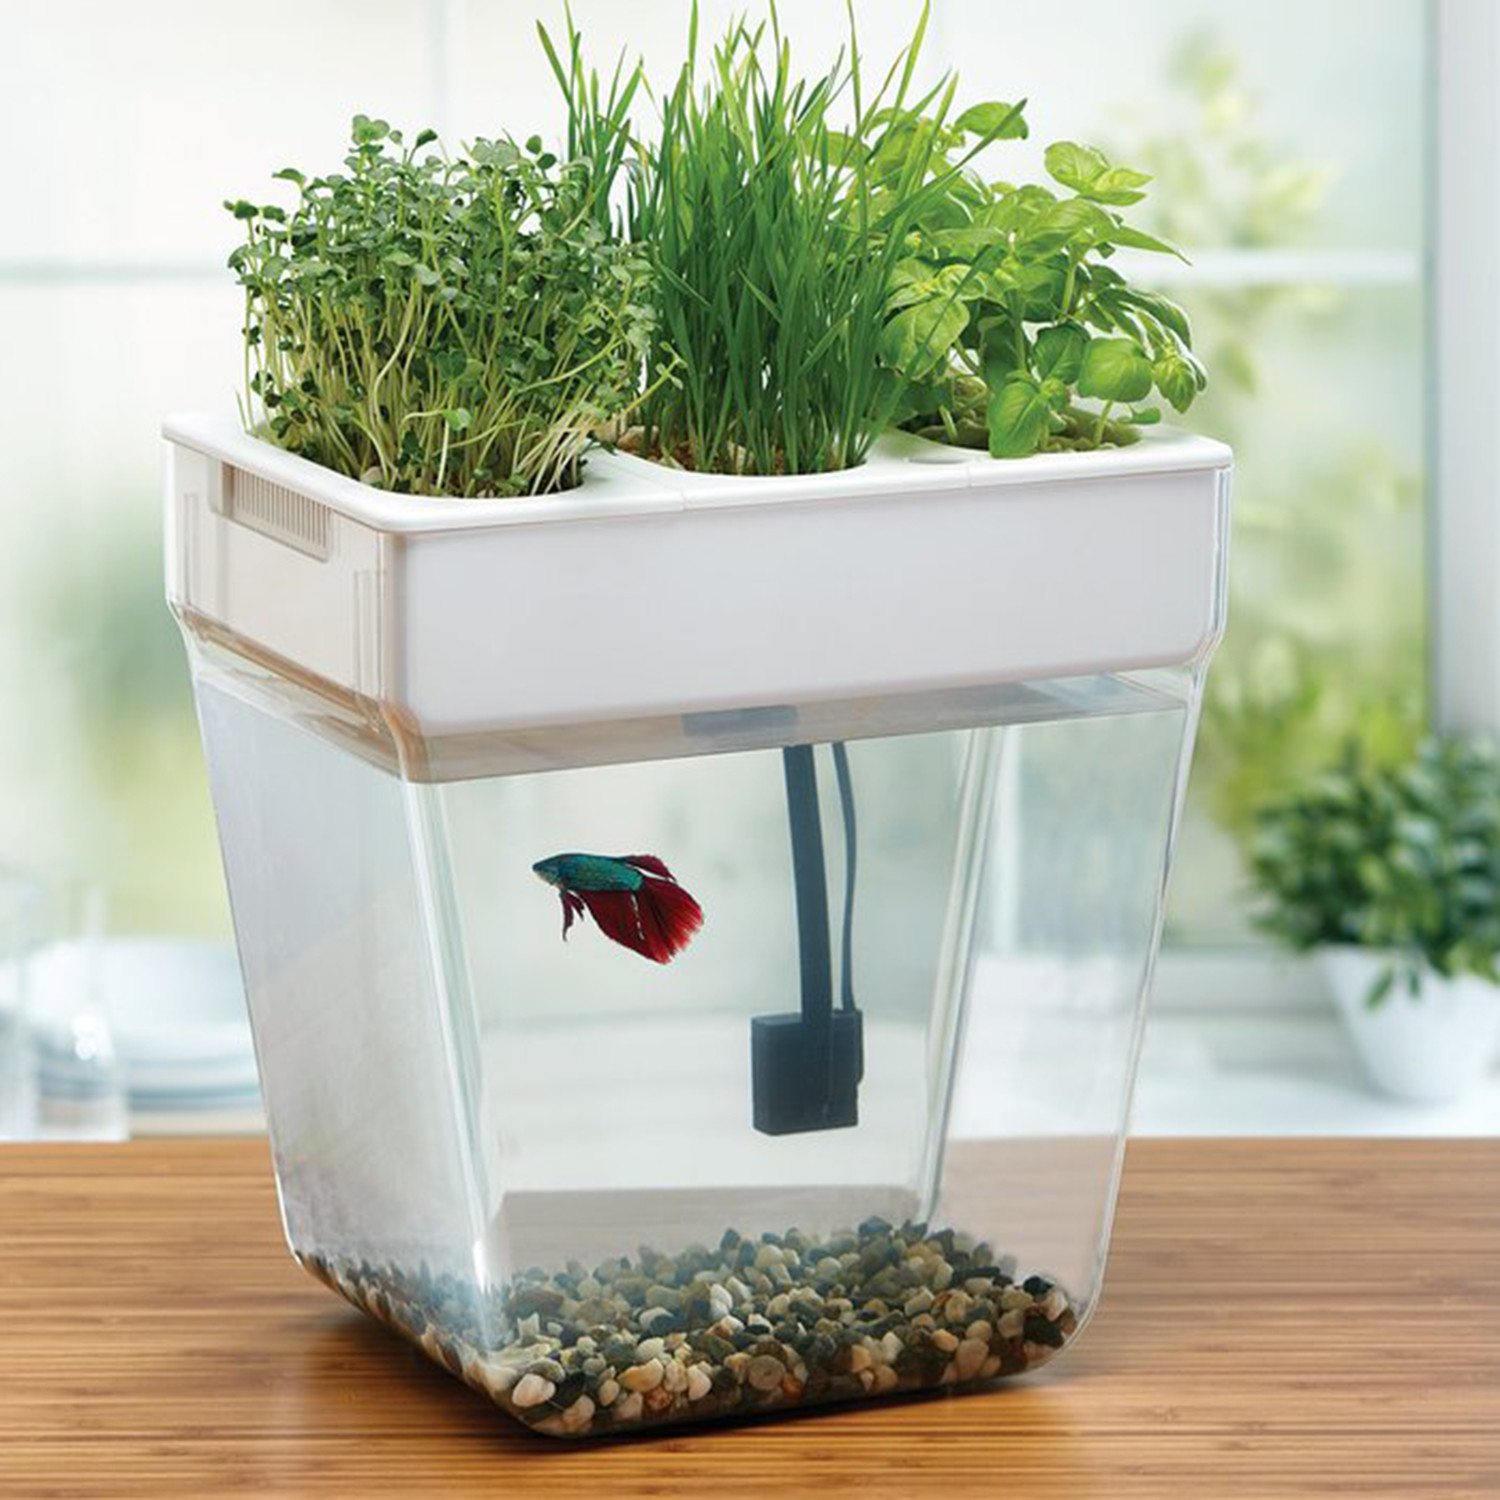 AQUAFARM WATER GARDEN - Back To The Roots - Touch of Modern